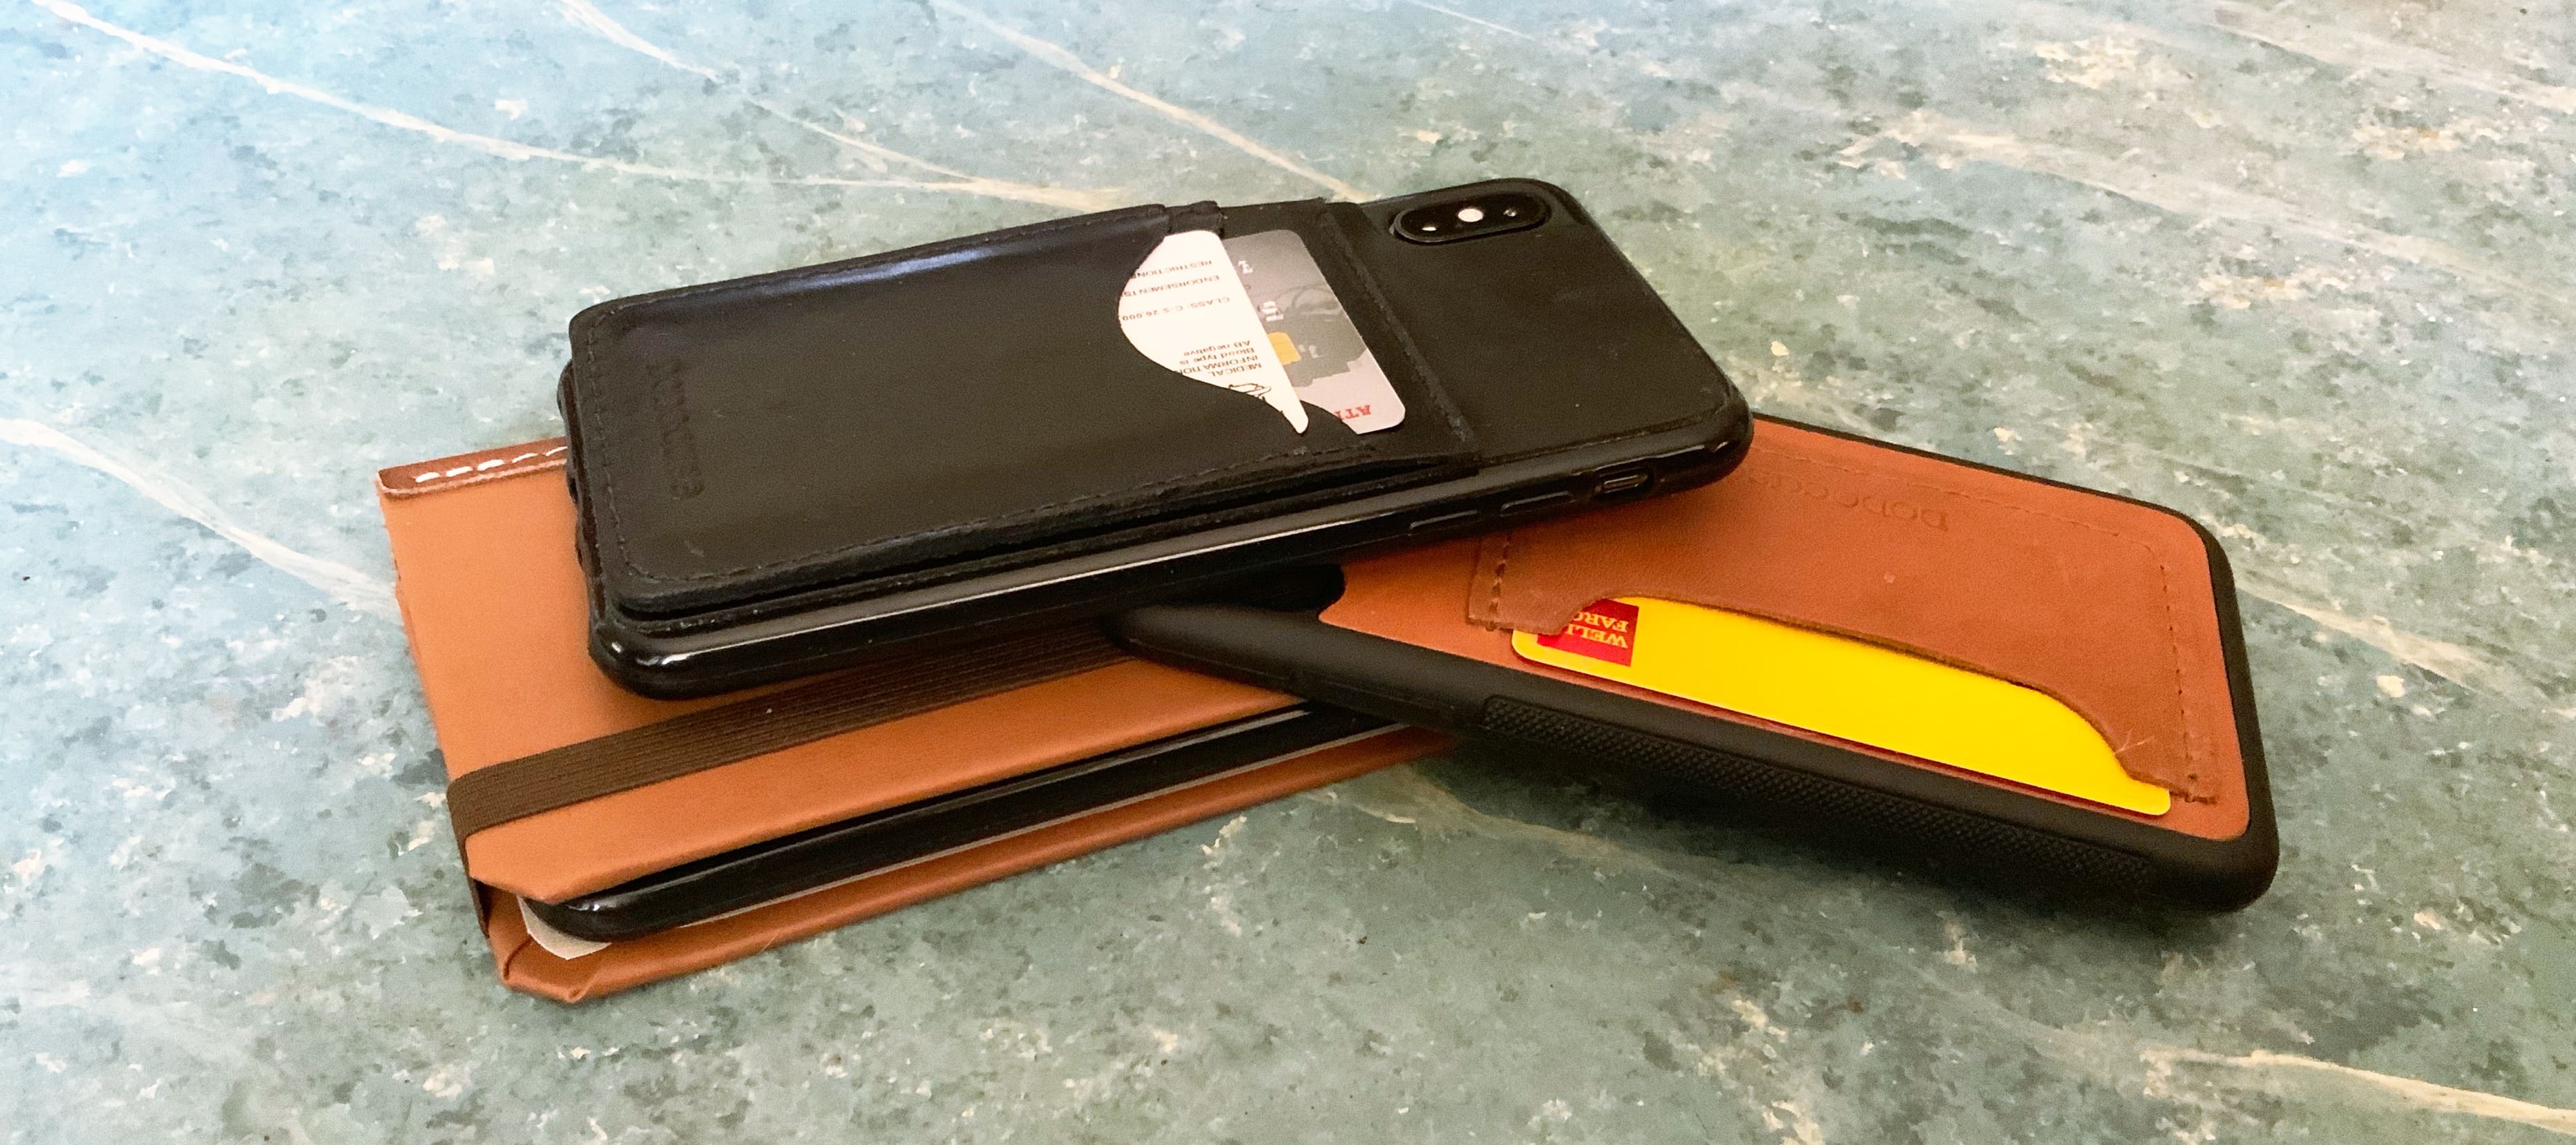 Any of these Dodocases can hold your iPhone and your credit cards, driver license, etc.